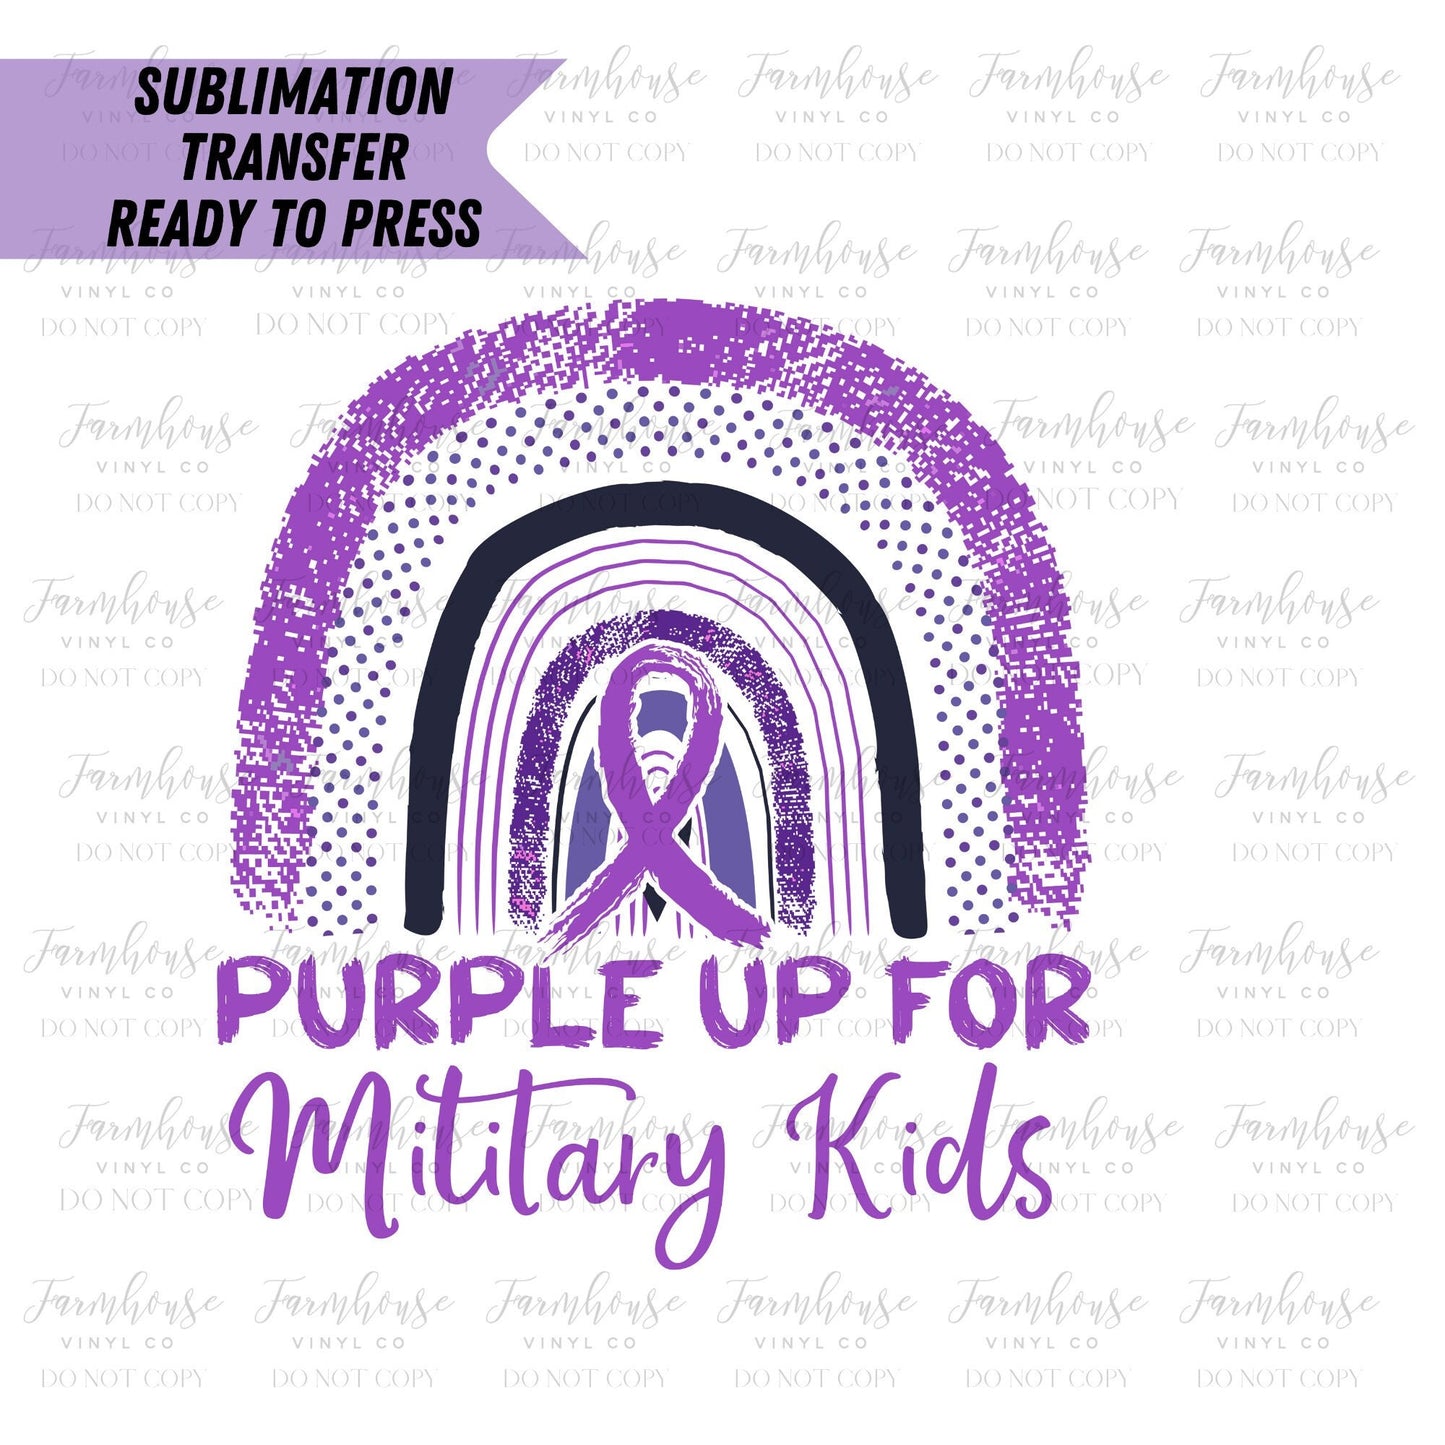 Purple Up for Military Kids, April Month of Military Child, Heat Transfer, Sublimation Transfer, DIY Sublimation, Transfer Ready To Press - Farmhouse Vinyl Co